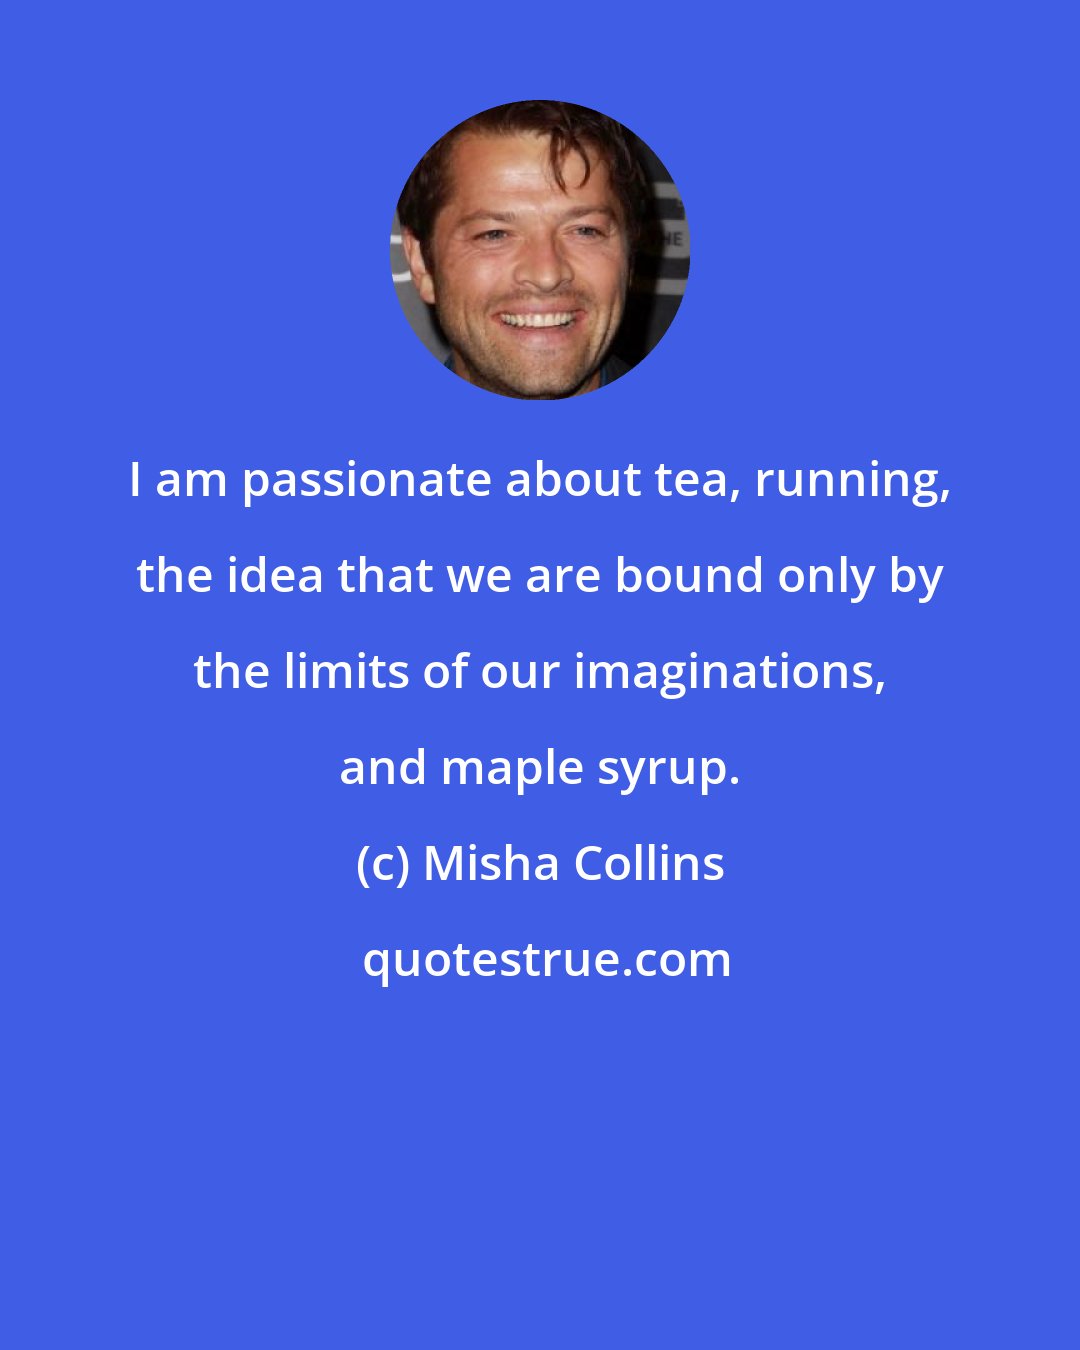 Misha Collins: I am passionate about tea, running, the idea that we are bound only by the limits of our imaginations, and maple syrup.